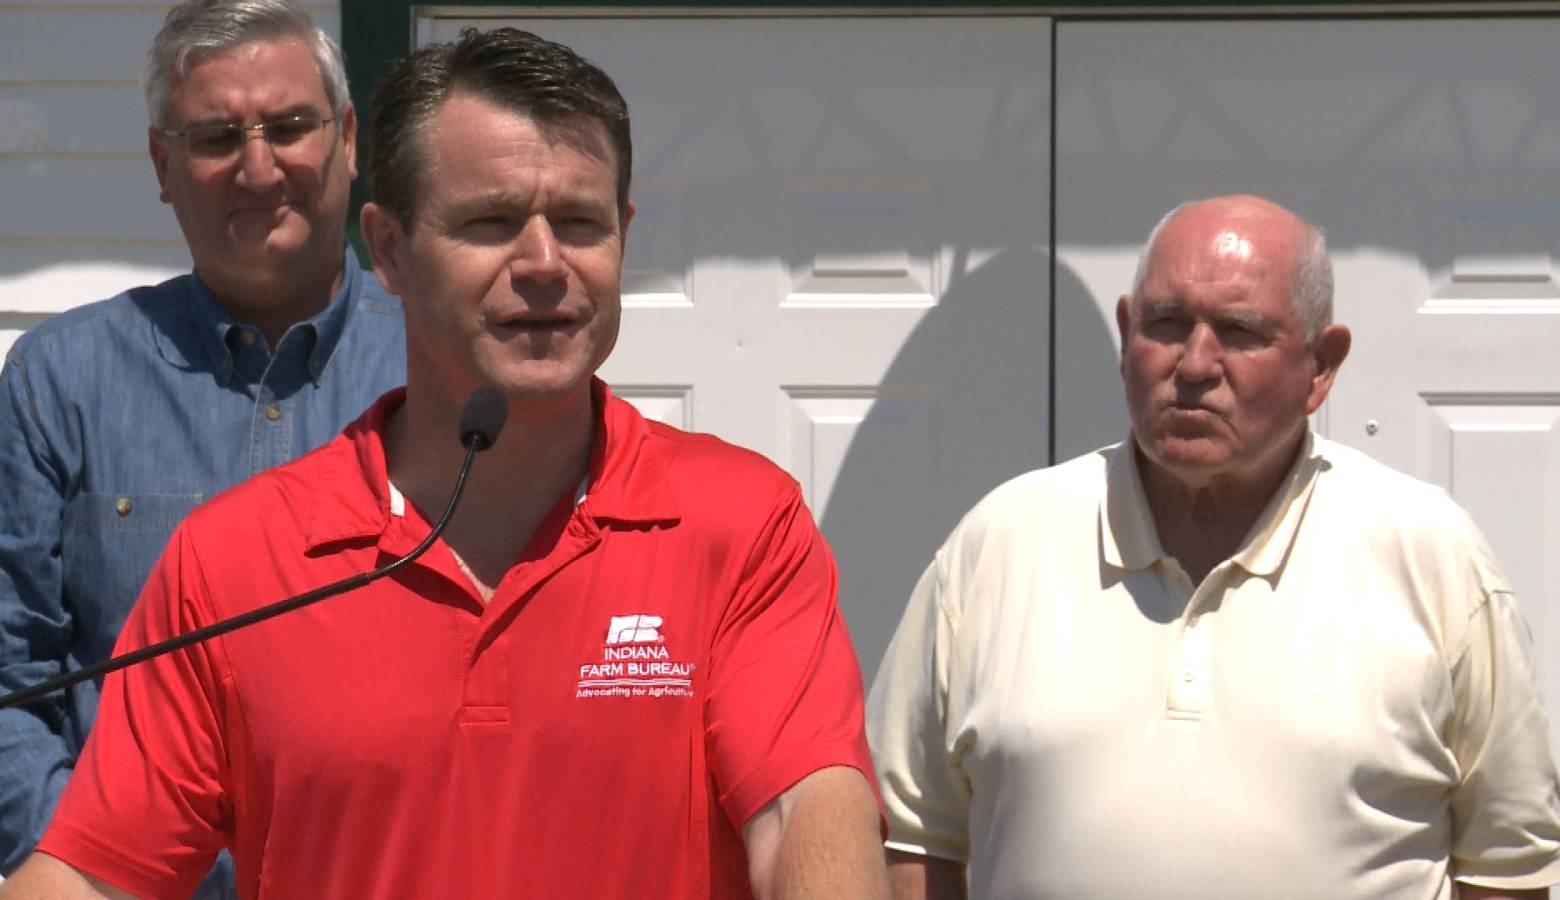 Todd Young speaks at the Indiana State Fair. (JD Gray/WTIU)